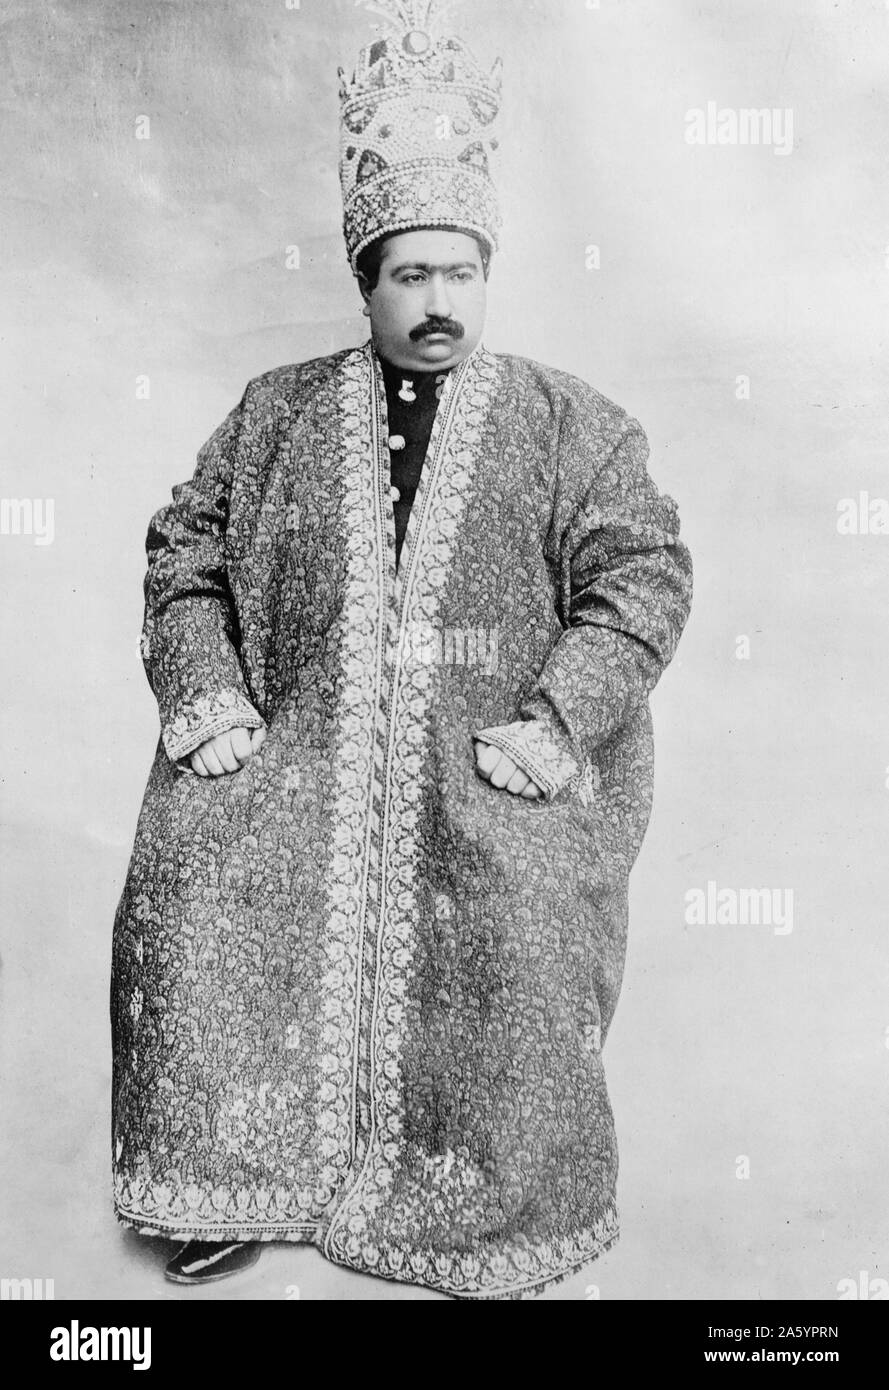 Shah of Persia, Mohammed Ali Mirzi, December 19, 1907. Photograph shows the Shah of Persia, full-length portrait, seated, wearing an ornate robe and crown. Stock Photo